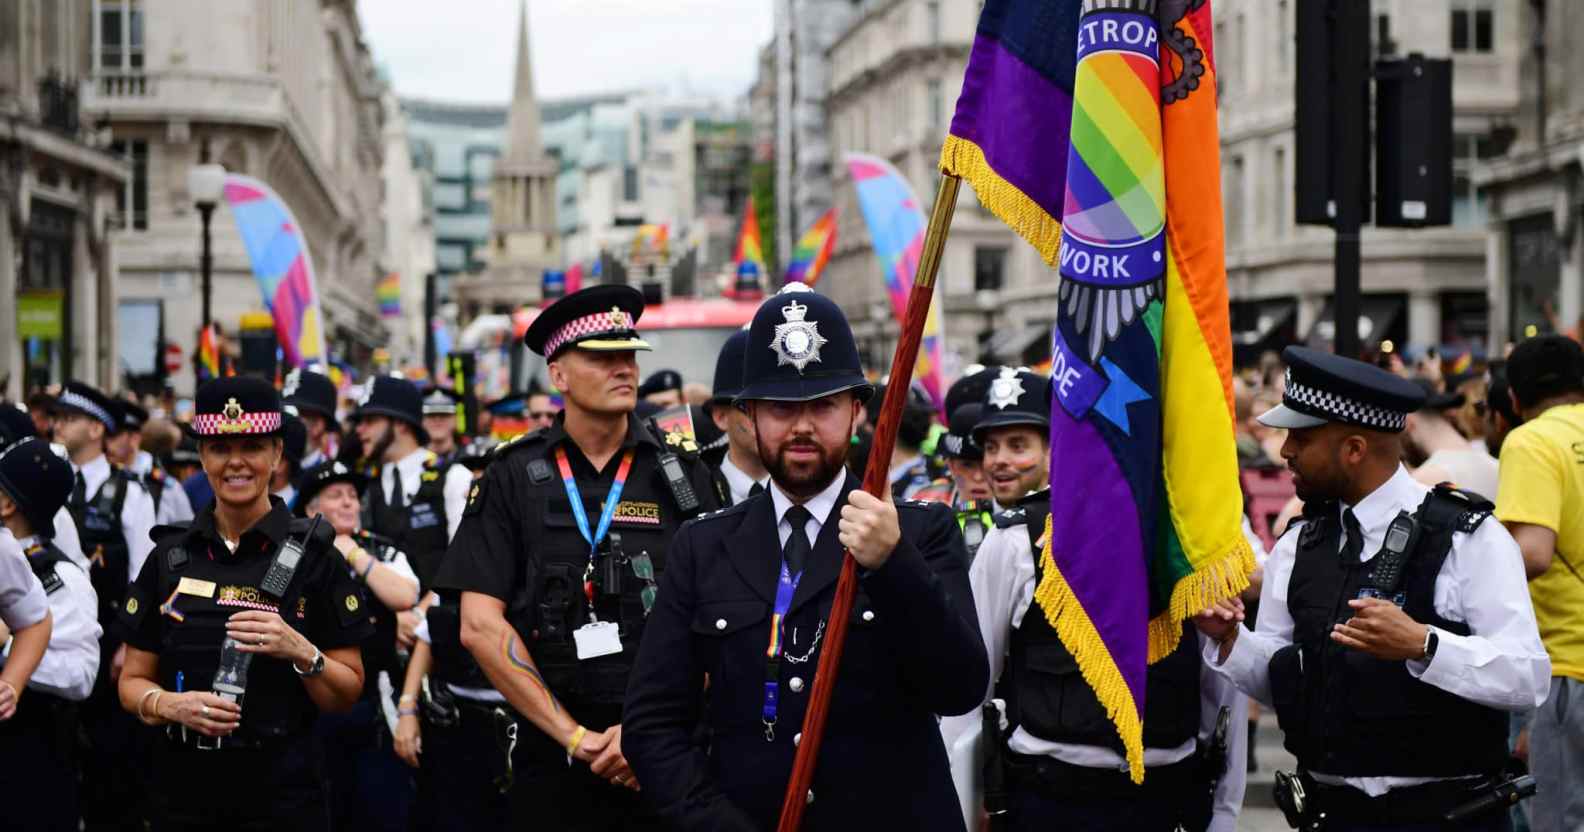 Members of the police march at Pride in London 2019